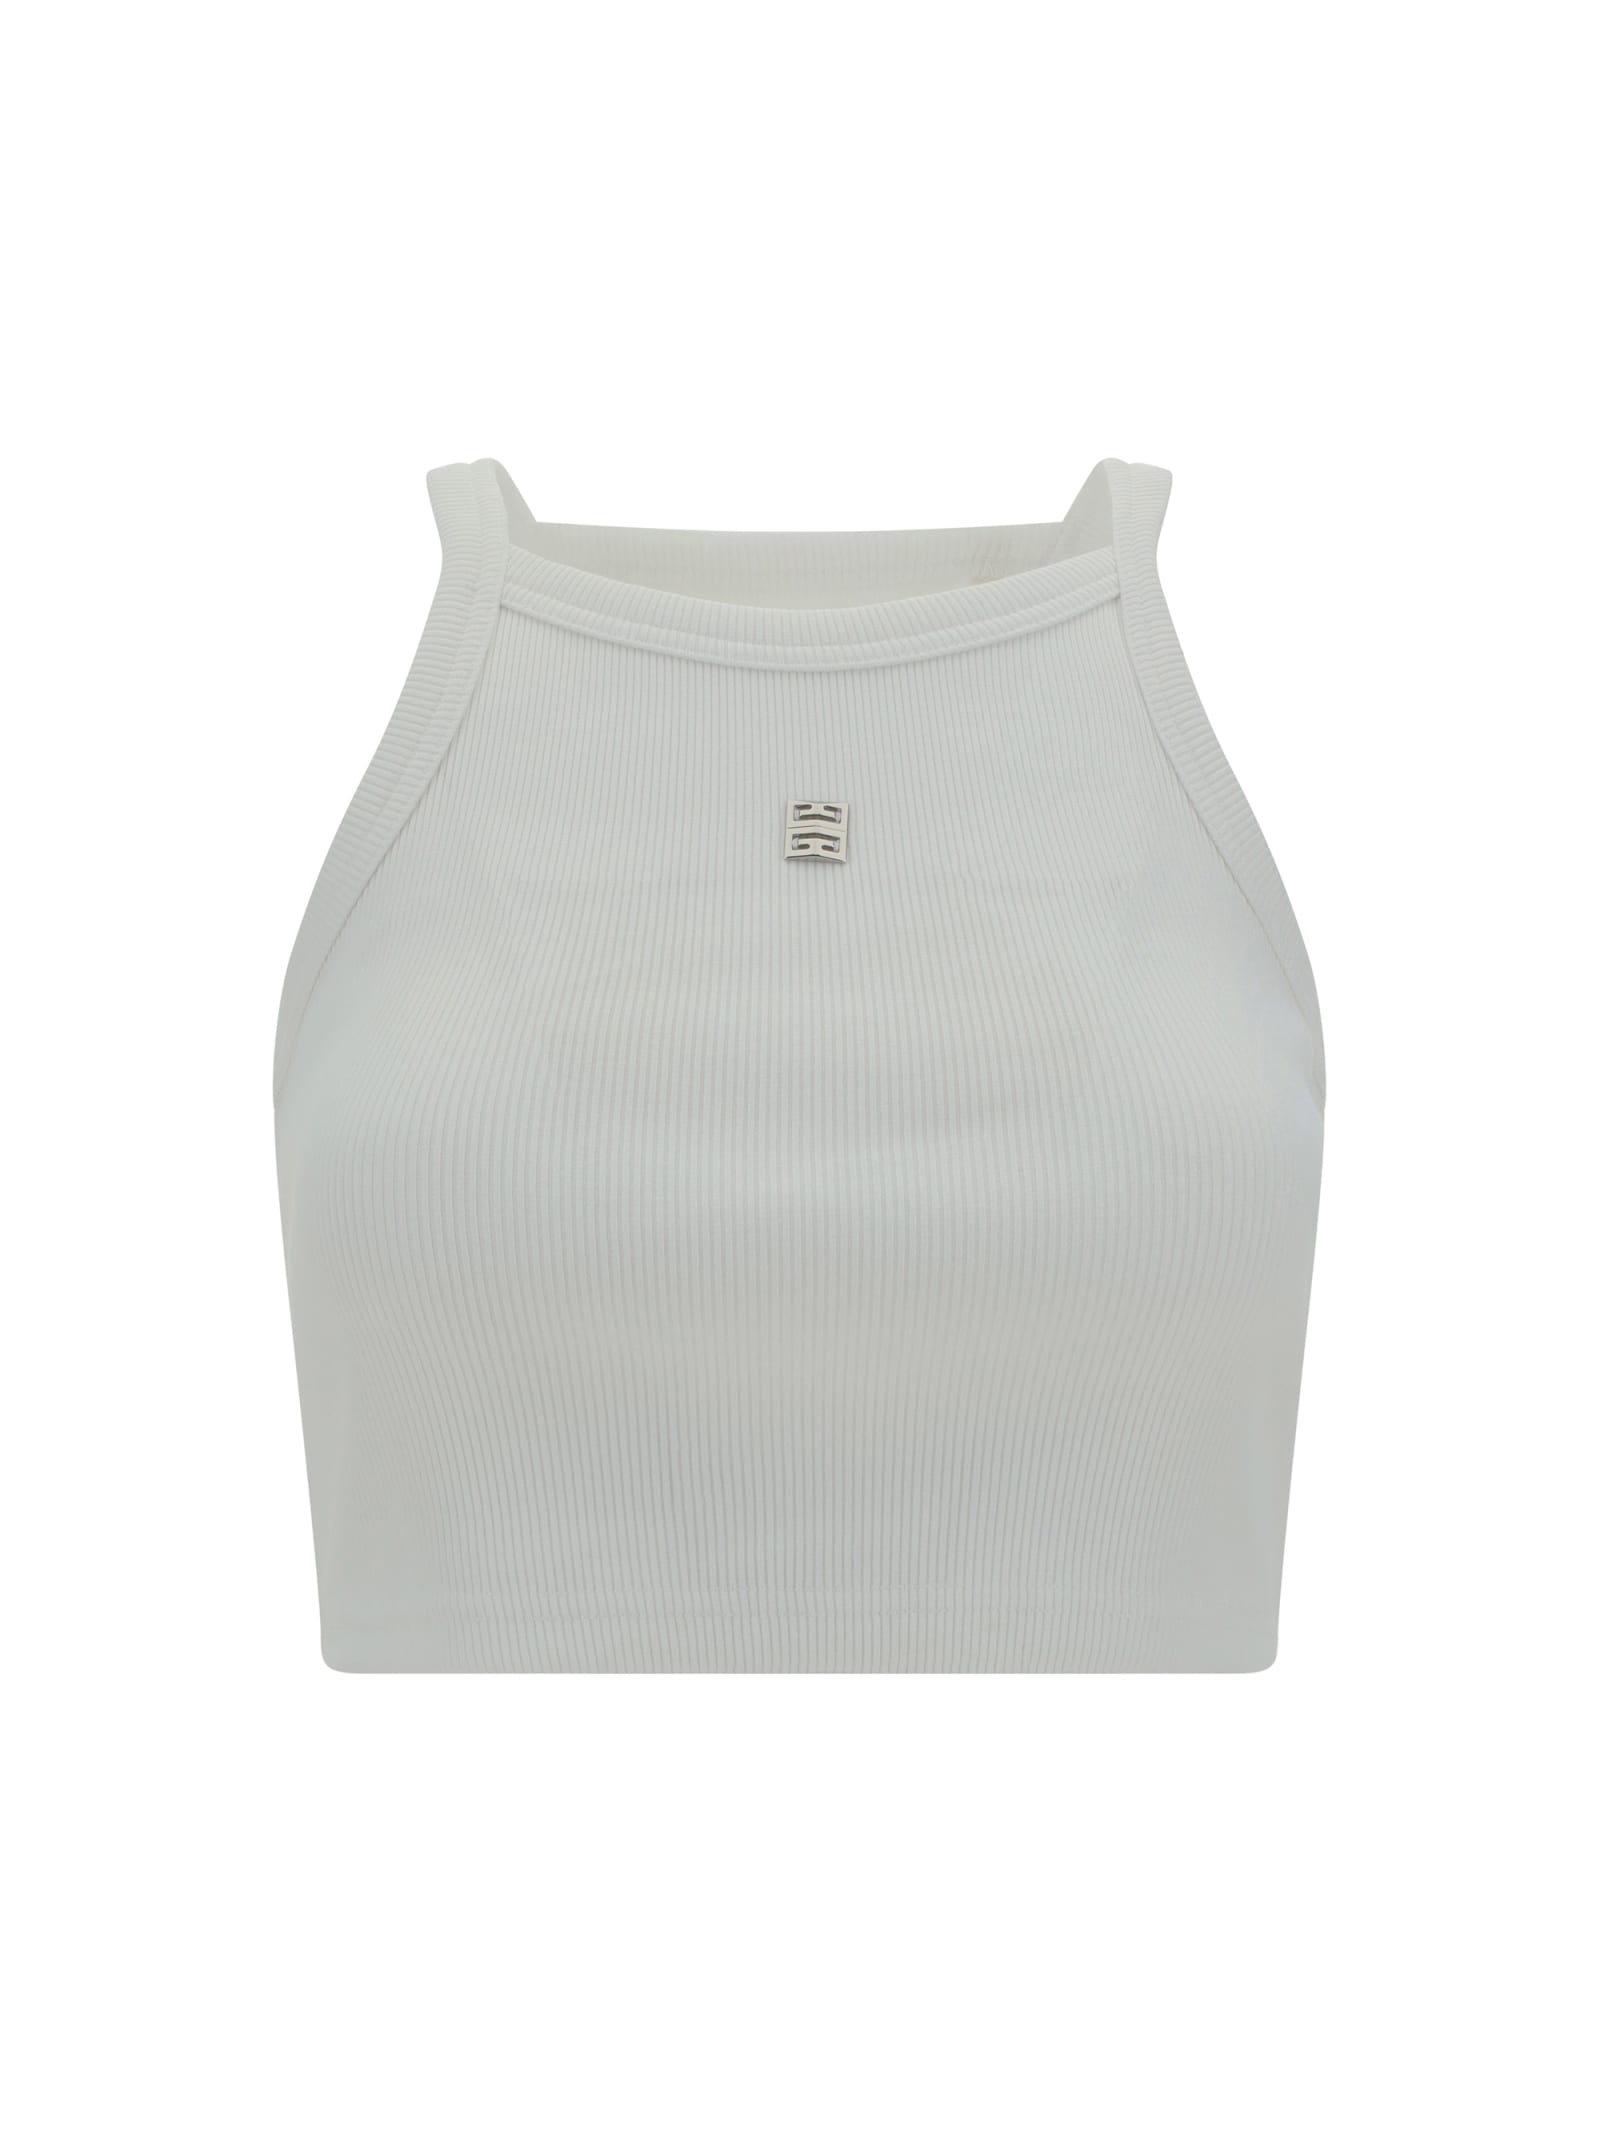 Givenchy 4g Plaque Cropped Tank Top